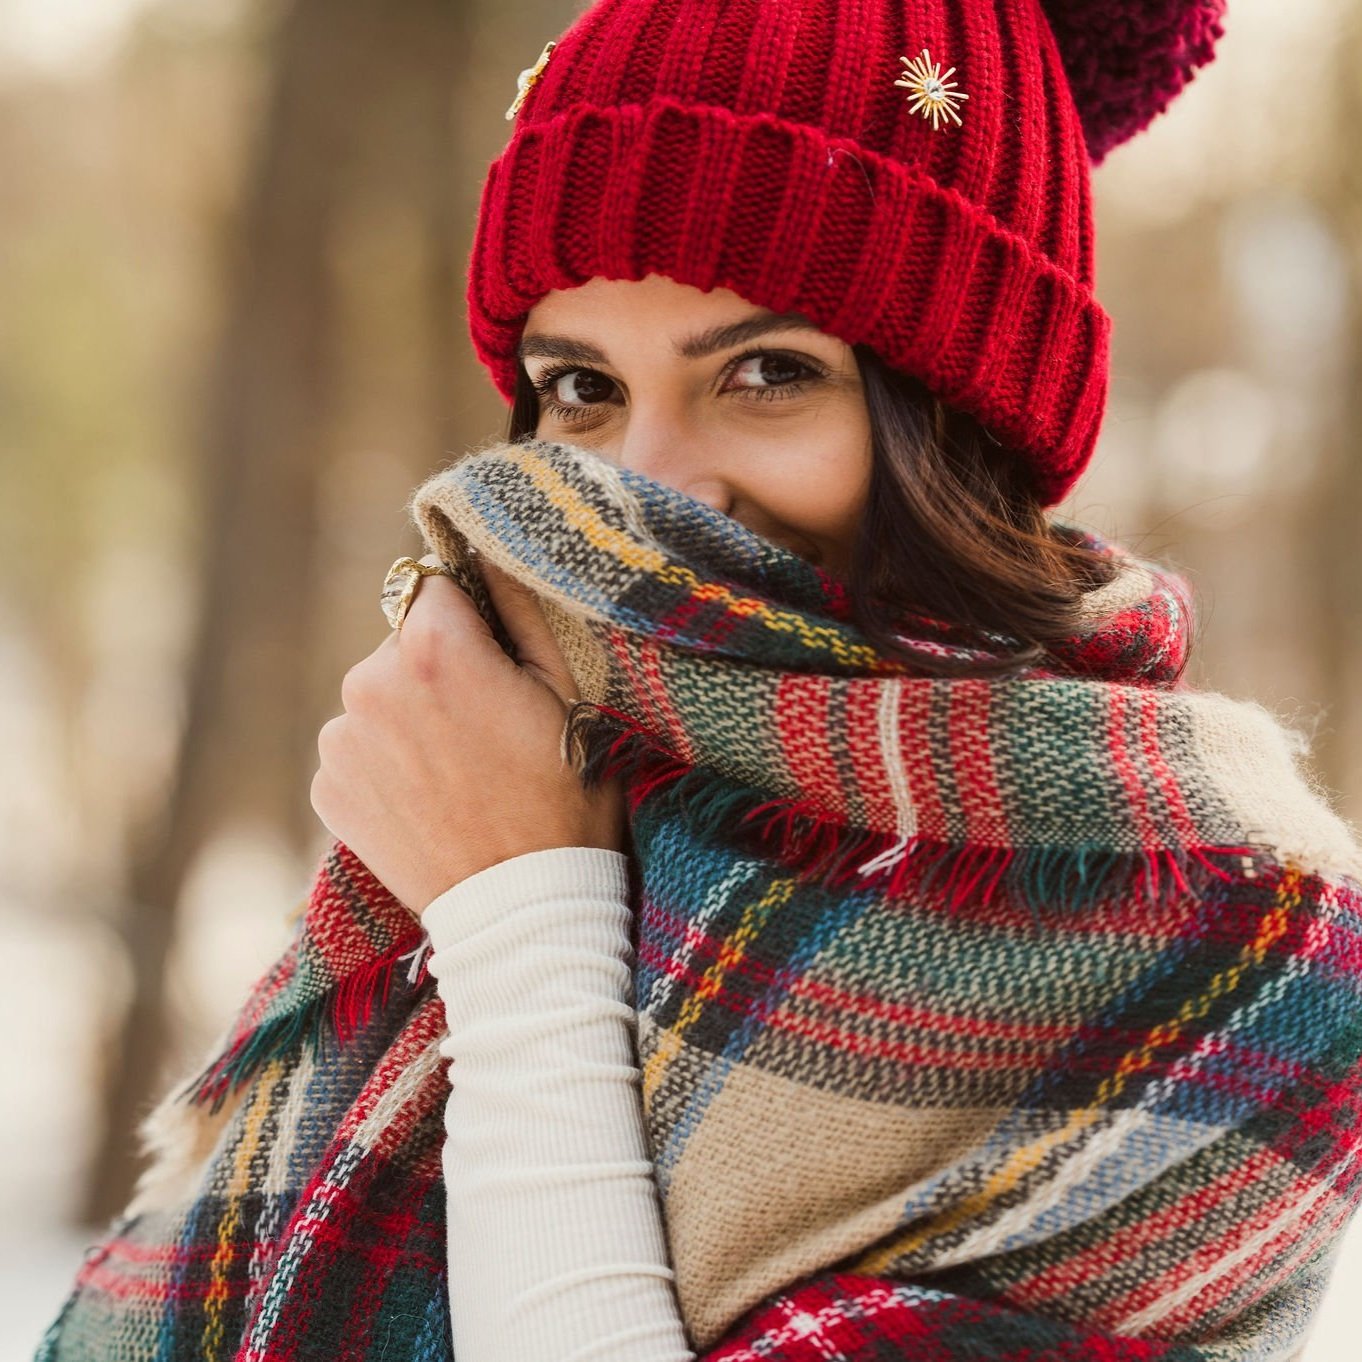 Red winter hat and oversized plaid scarf.